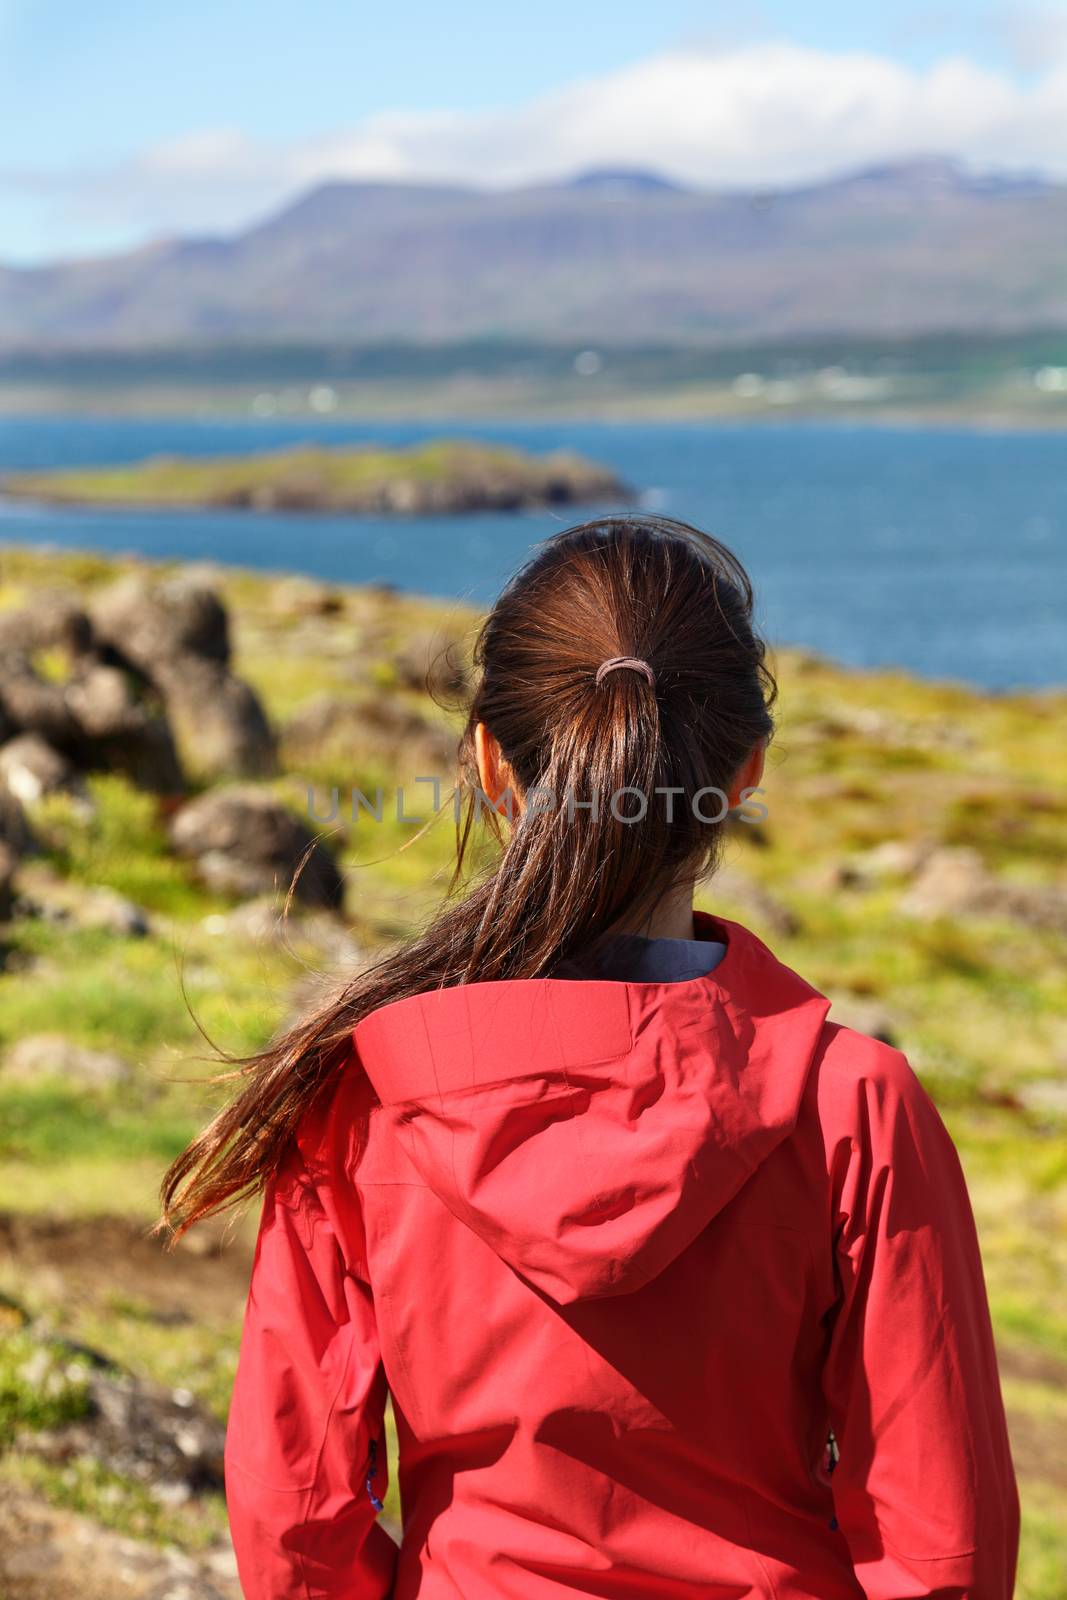 Hiking woman in hardshell jacket in Iceland nature looking at view enjoying beautiful scenic landscape on hike. Healthy active lifestyle concept with woman looking away showing backside.